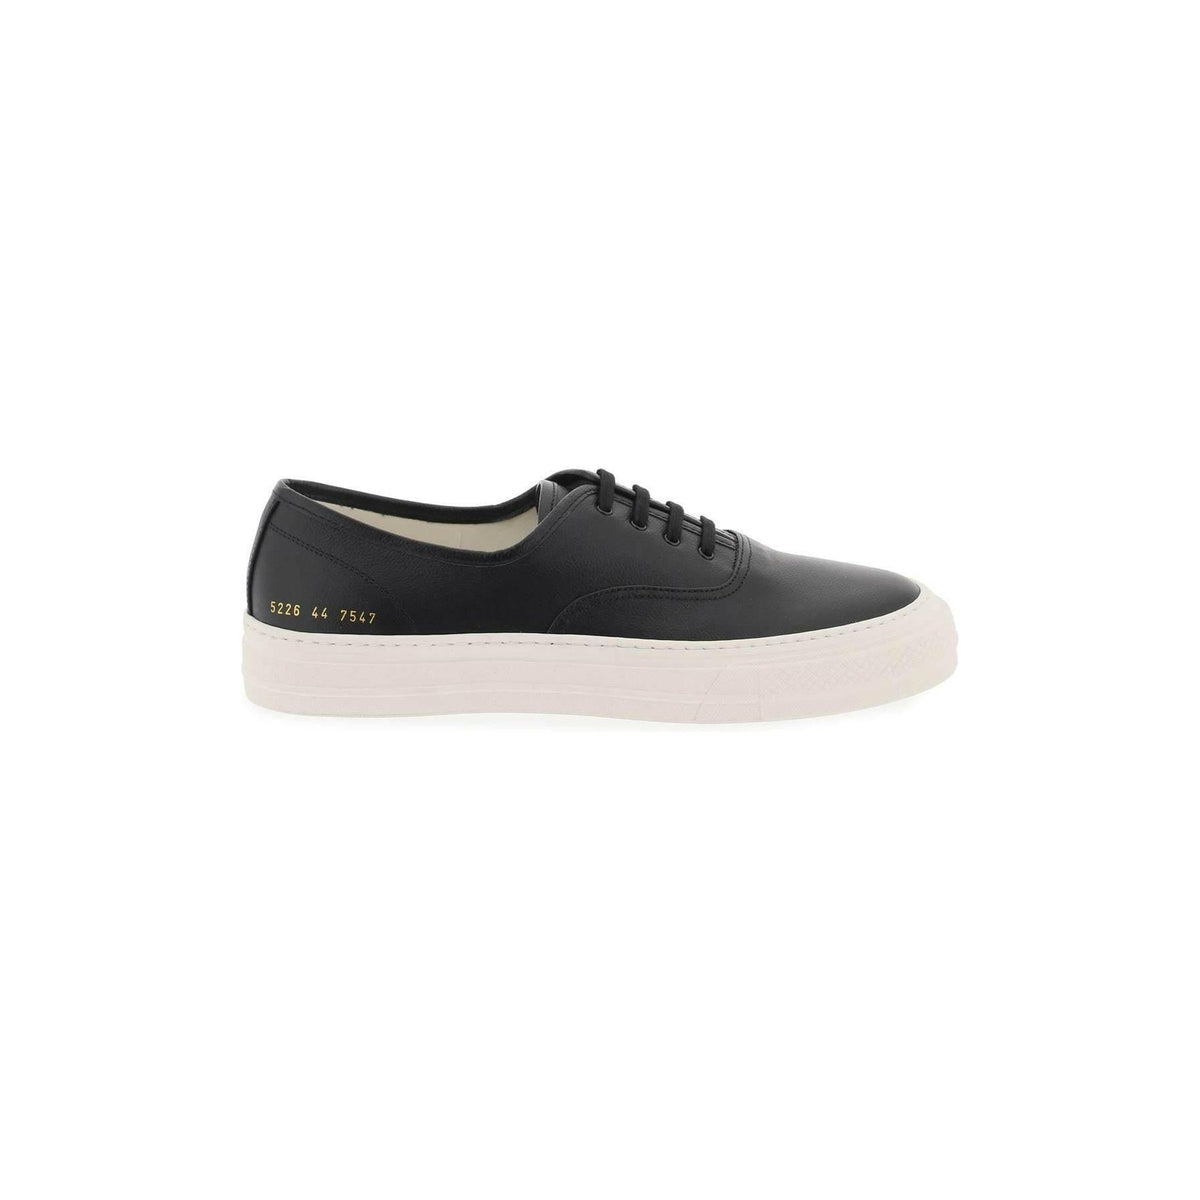 COMMON PROJECTS - Black Hammered Leather Sneakers - JOHN JULIA